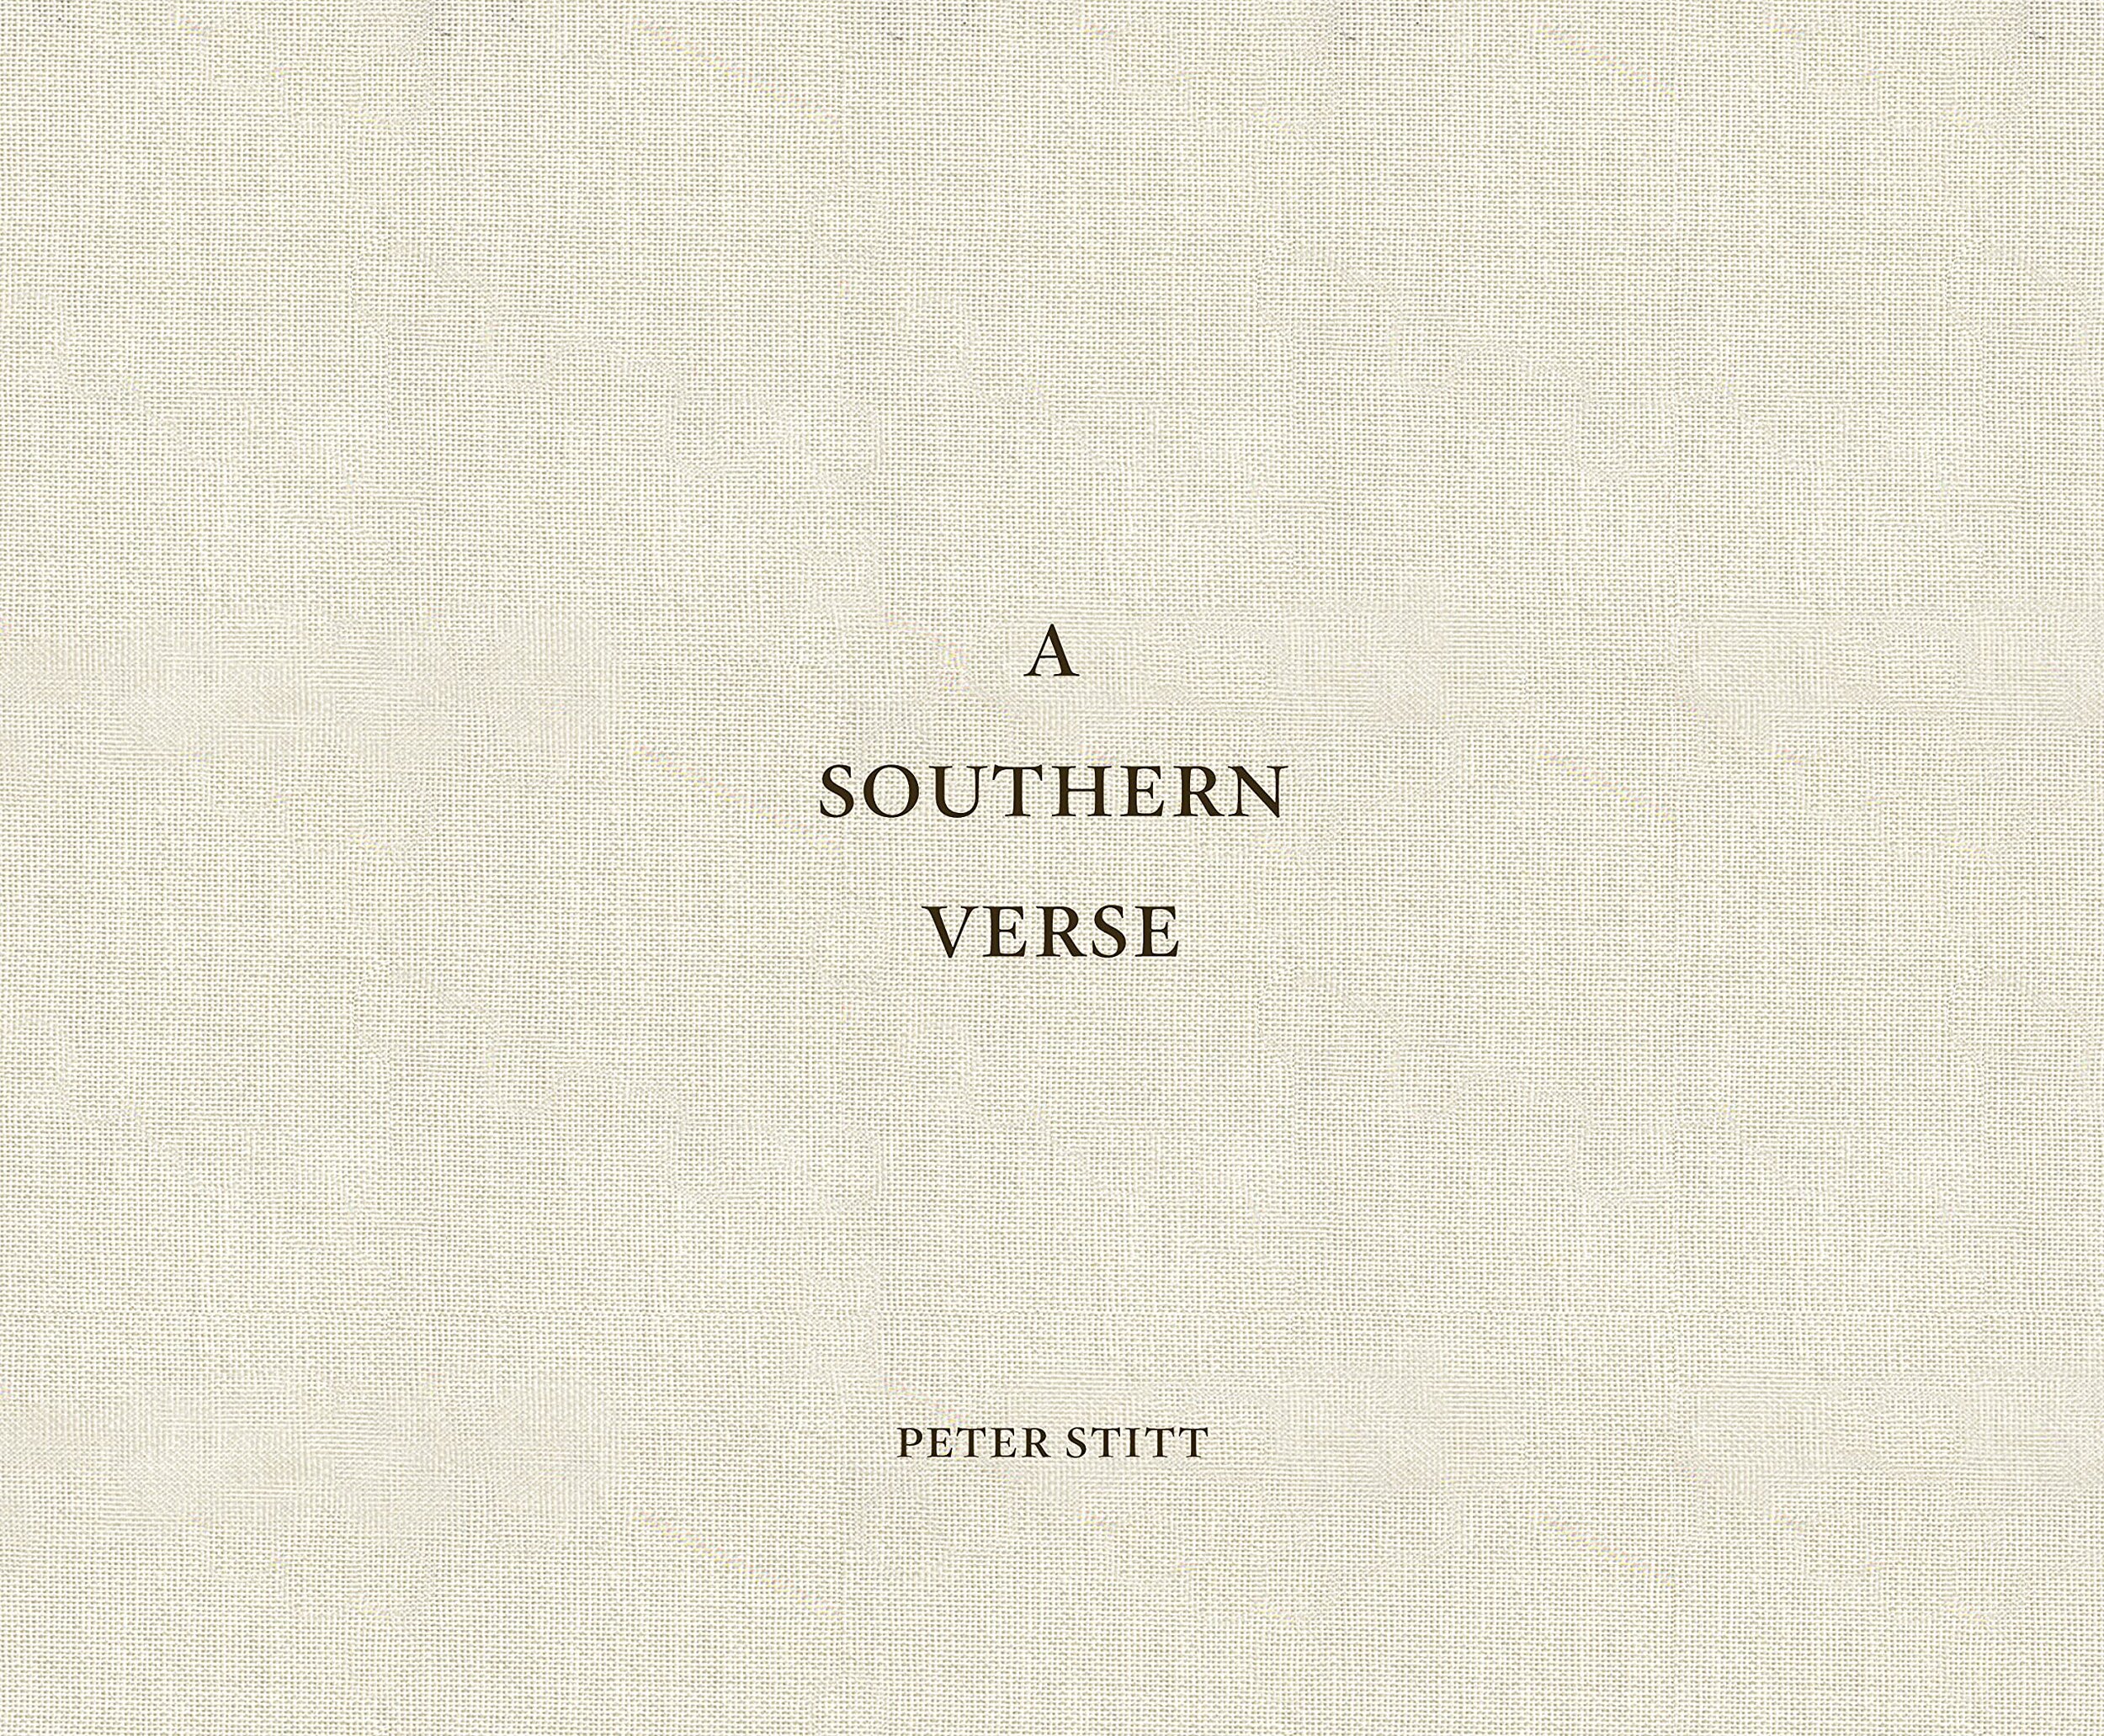  An Exploration of the Contemporary Rural South. (Book available in shop) 